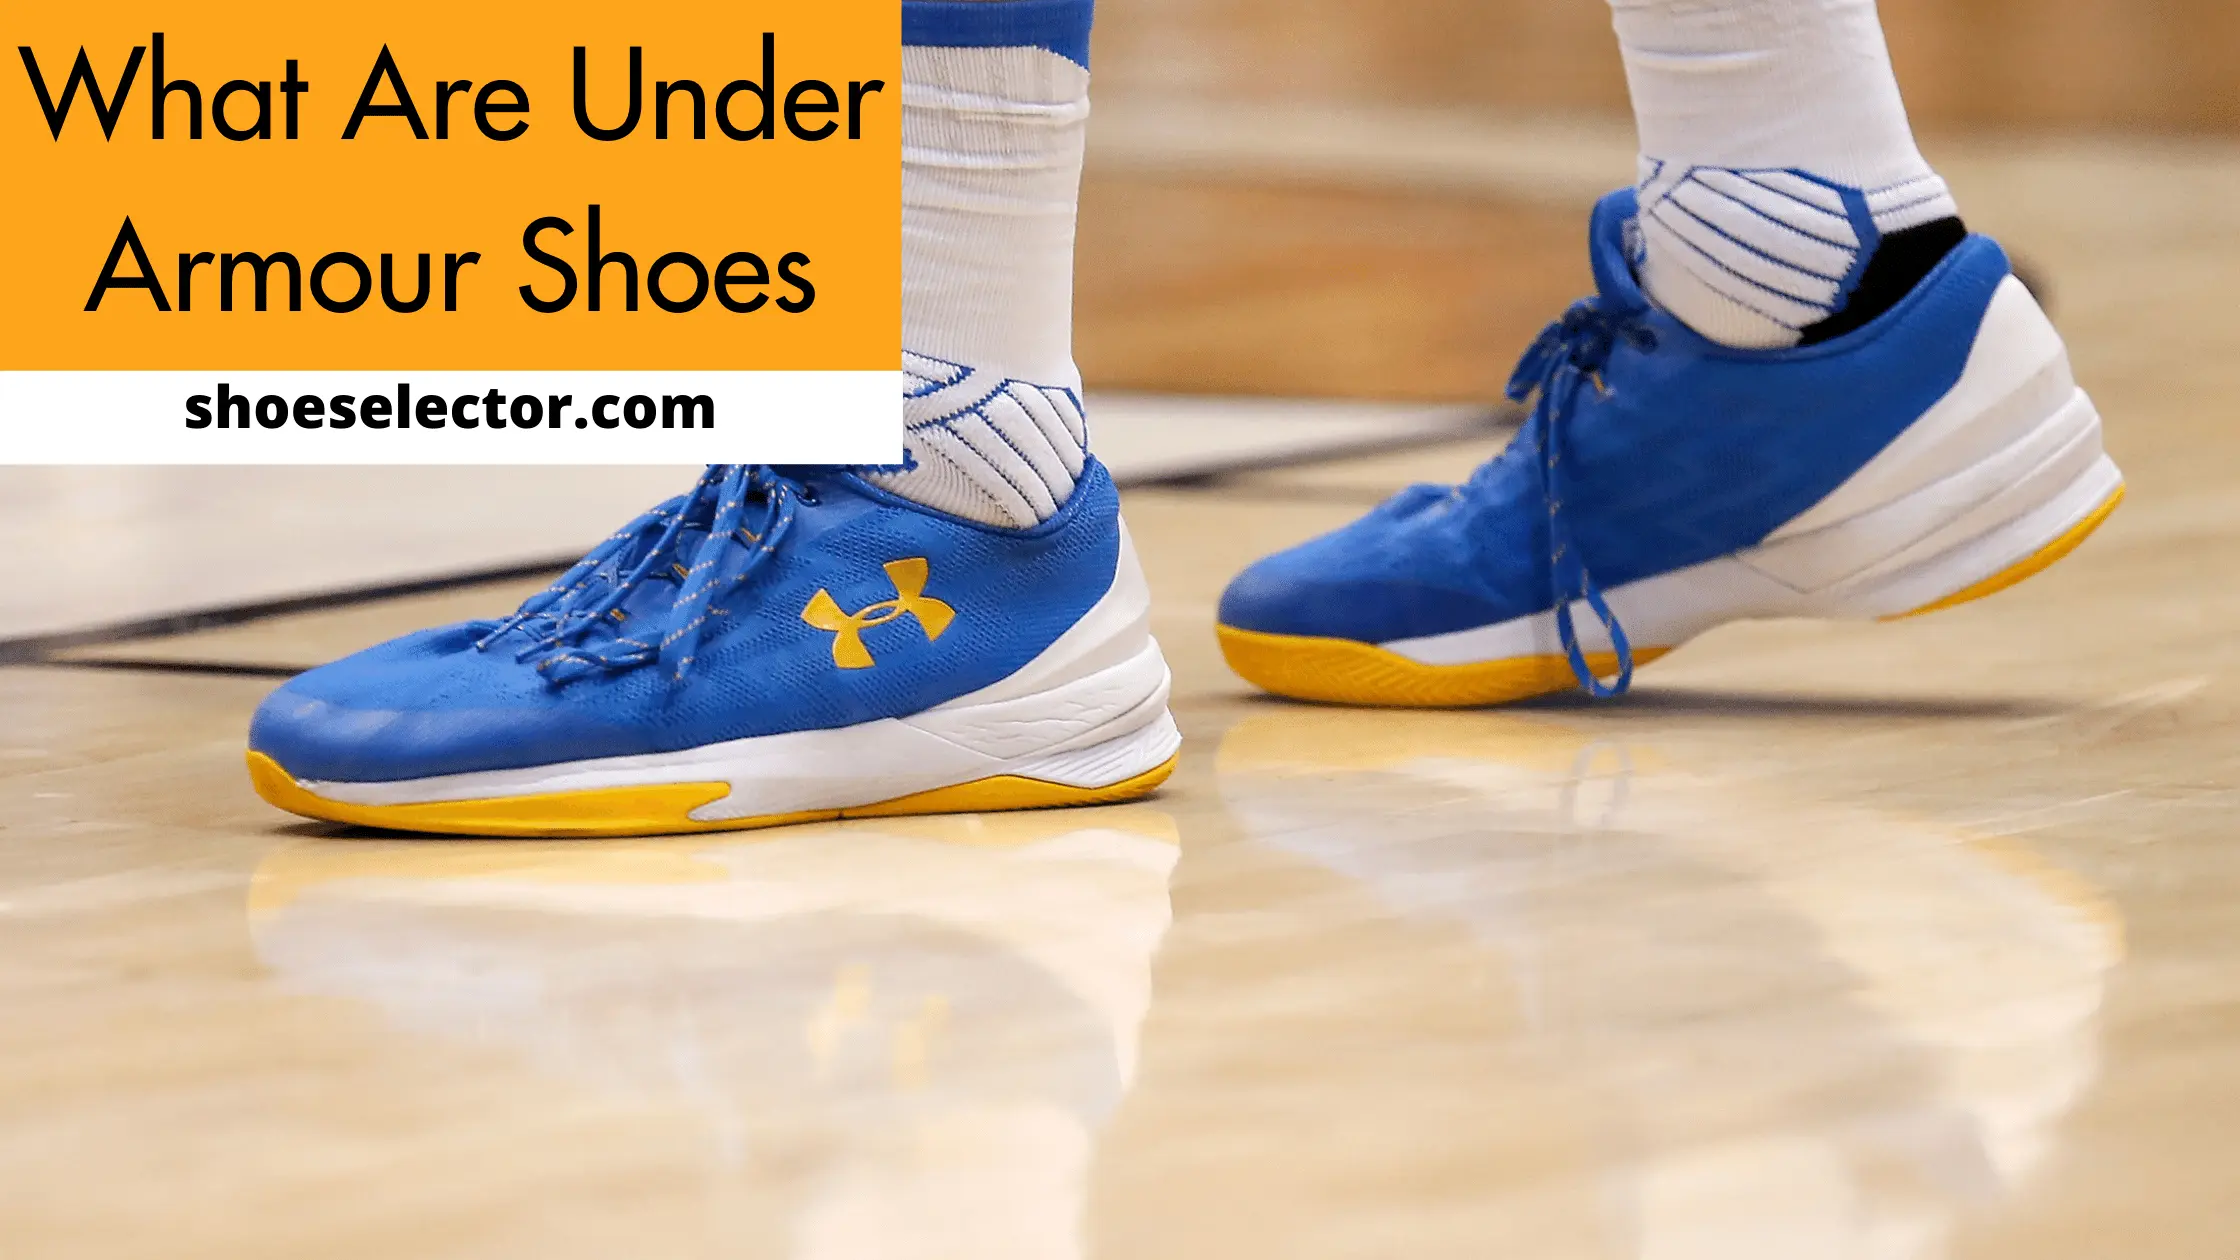 What Are Under Armour Shoes?